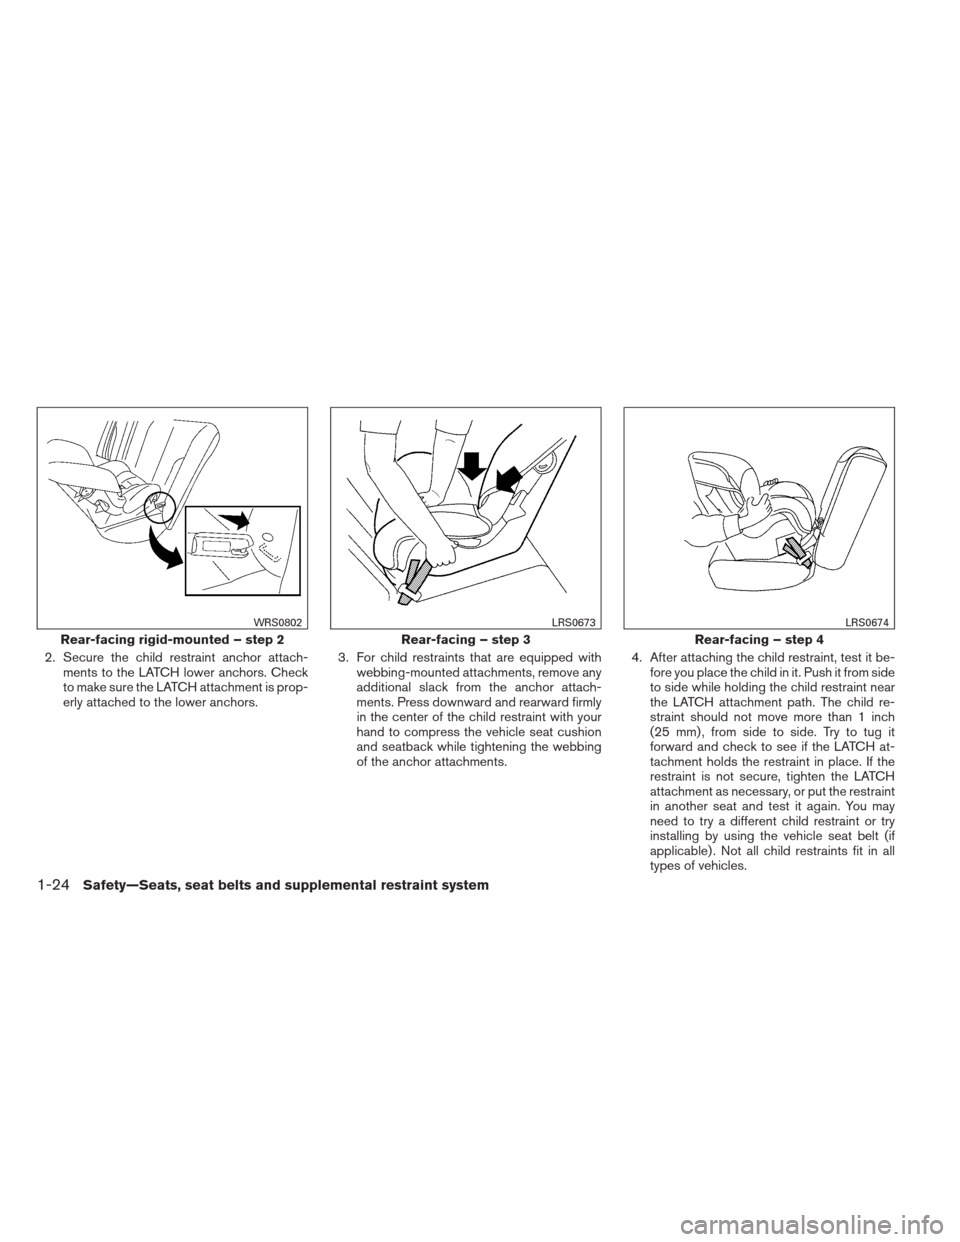 NISSAN ALTIMA 2013 L33 / 5.G Service Manual 2. Secure the child restraint anchor attach-ments to the LATCH lower anchors. Check
to make sure the LATCH attachment is prop-
erly attached to the lower anchors. 3. For child restraints that are equi